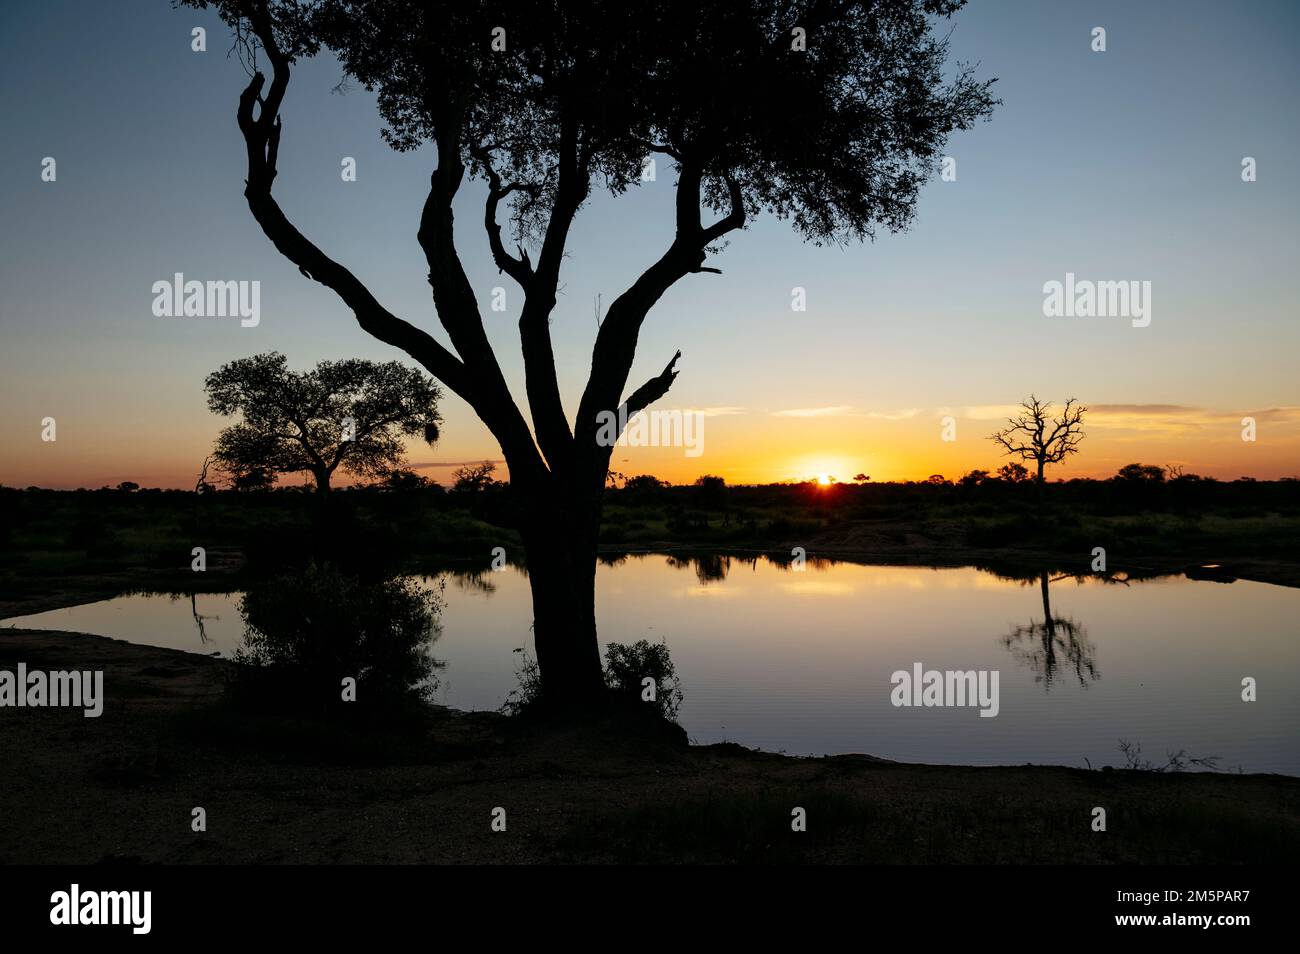 Sunset over Lake, Timbavati Private Nature Reserve, Kruger National Park, South Africa Stock Photo